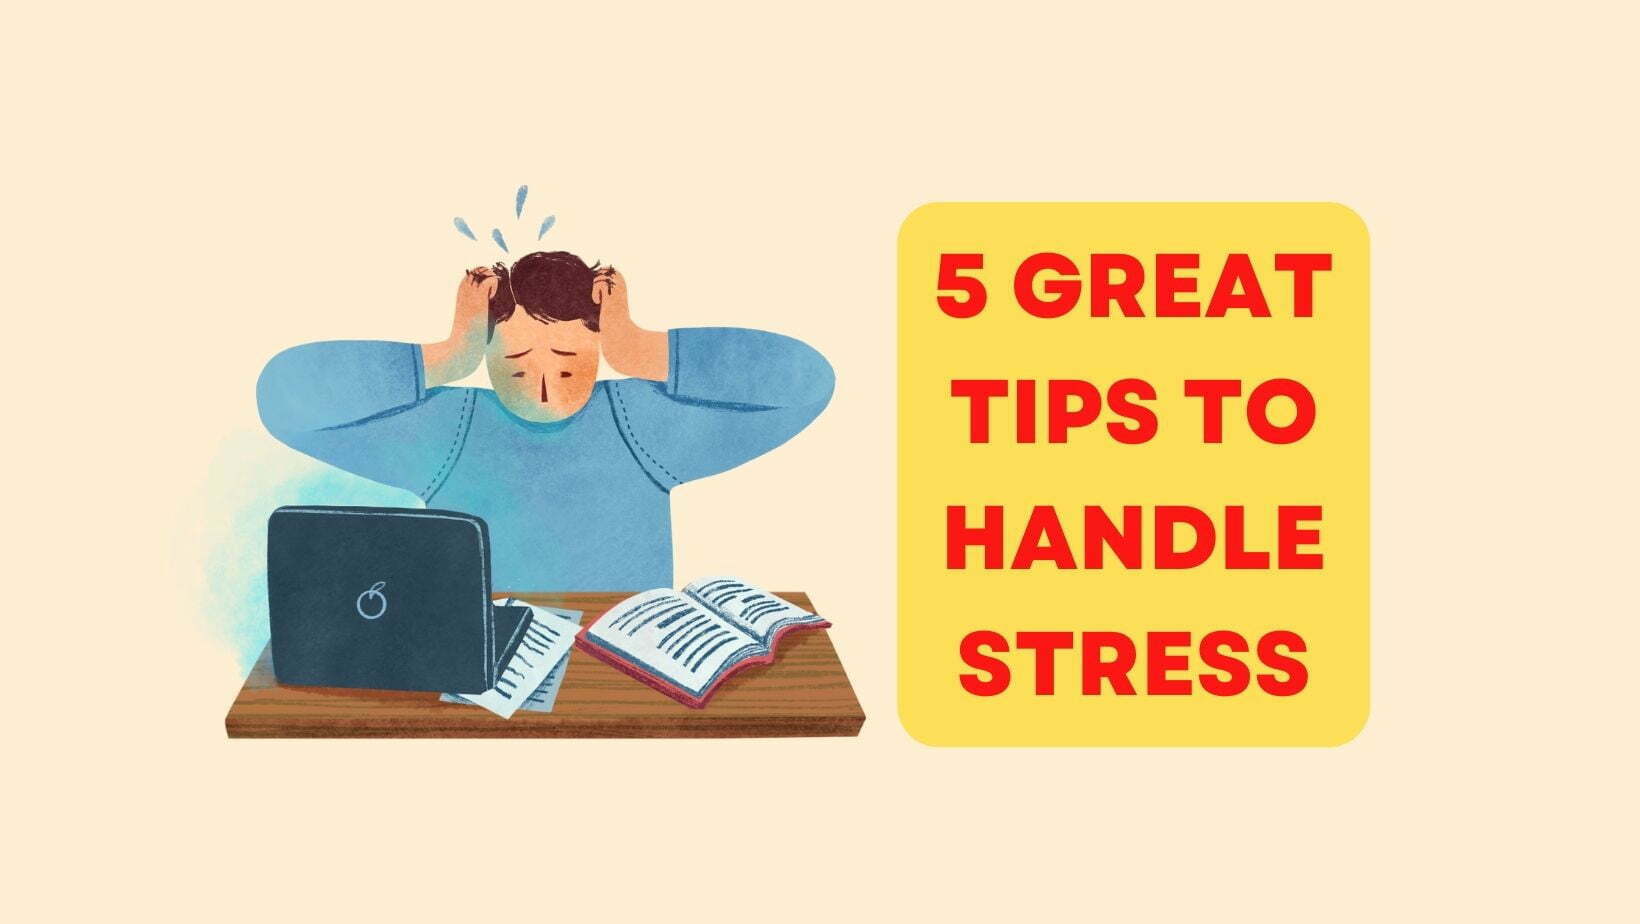 5 Great Tips to Handle Stress